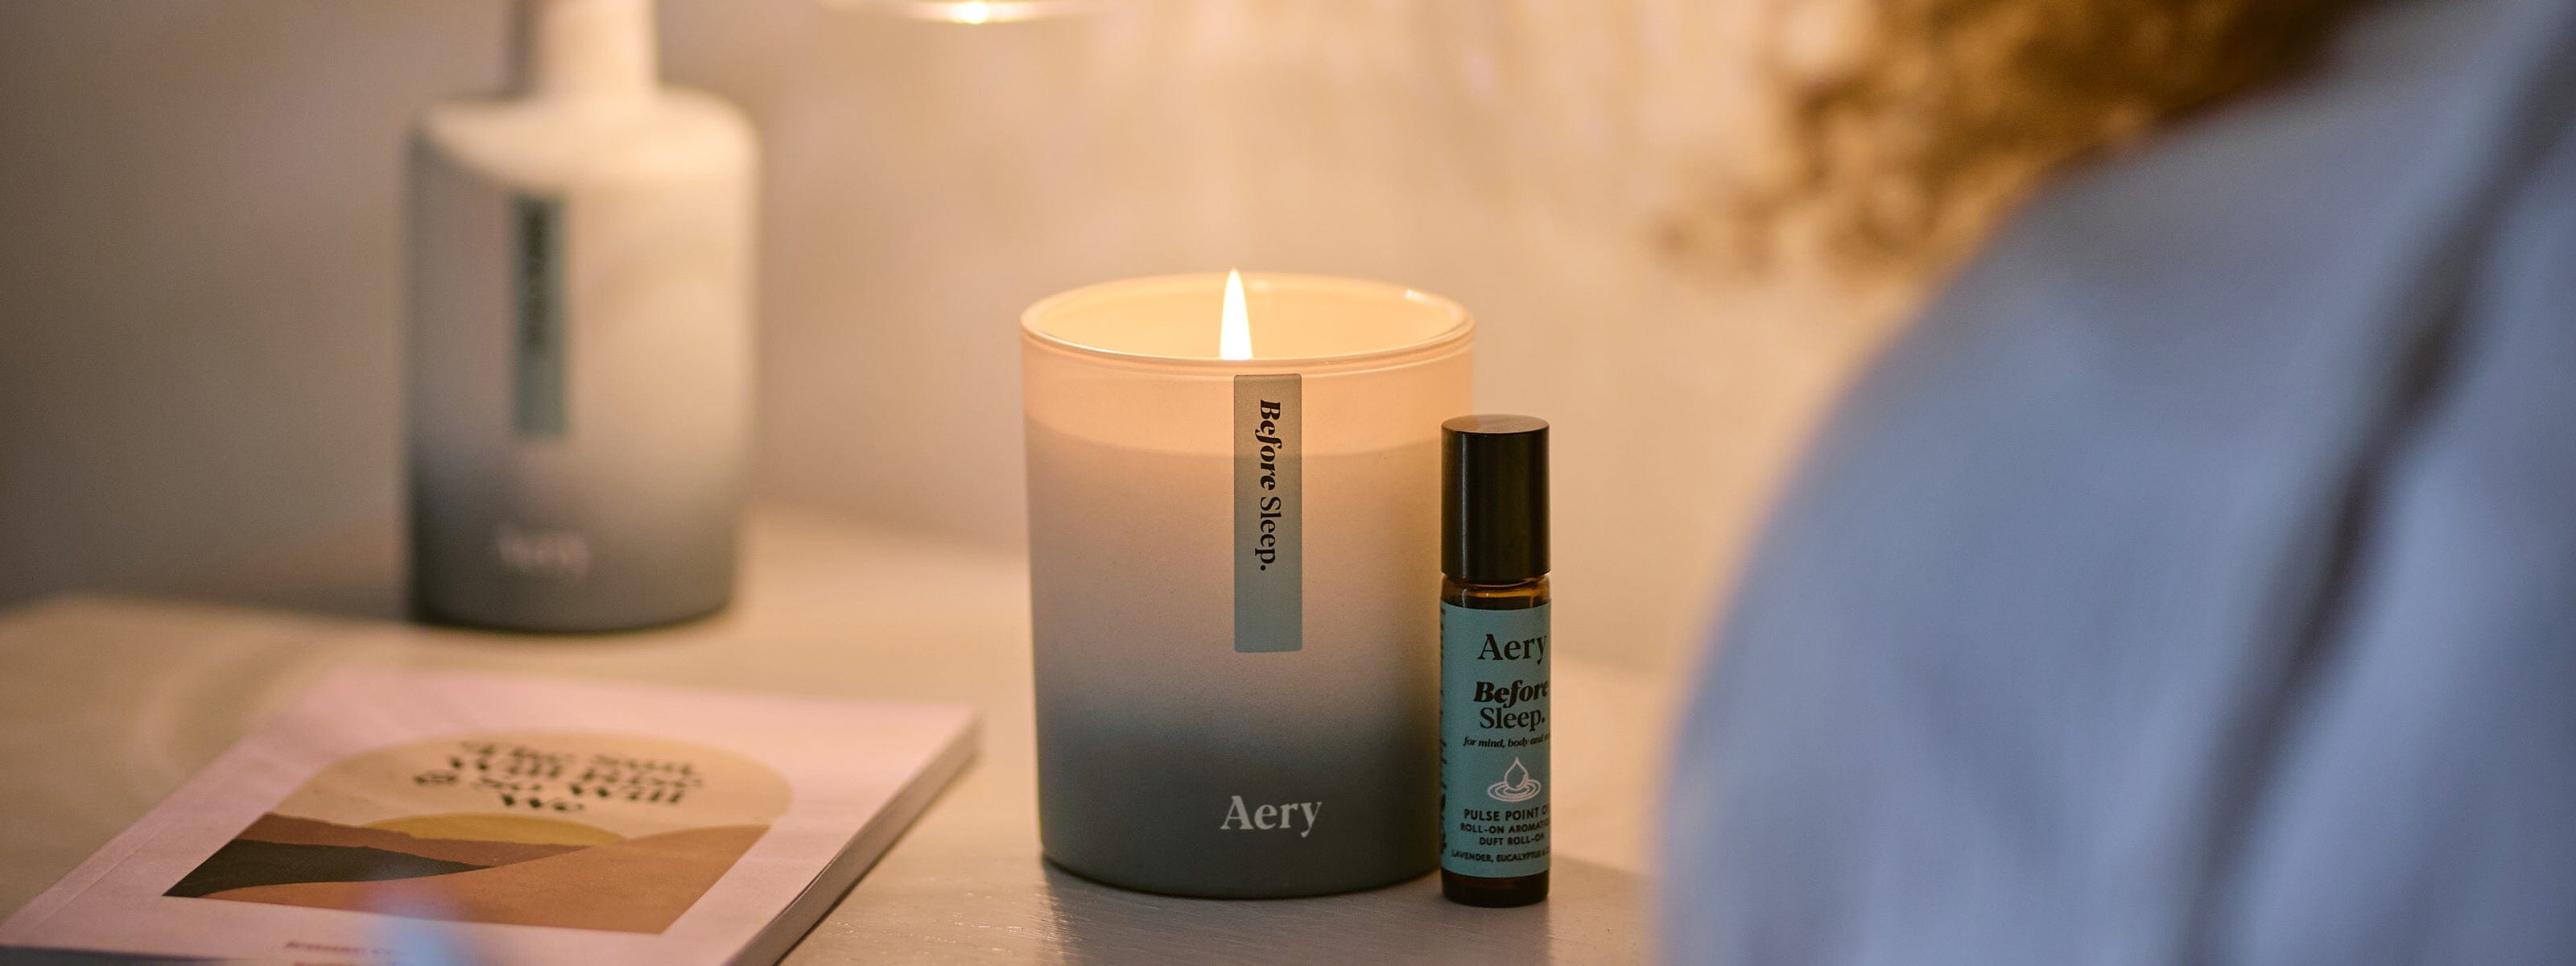 Best scented candles for sleep